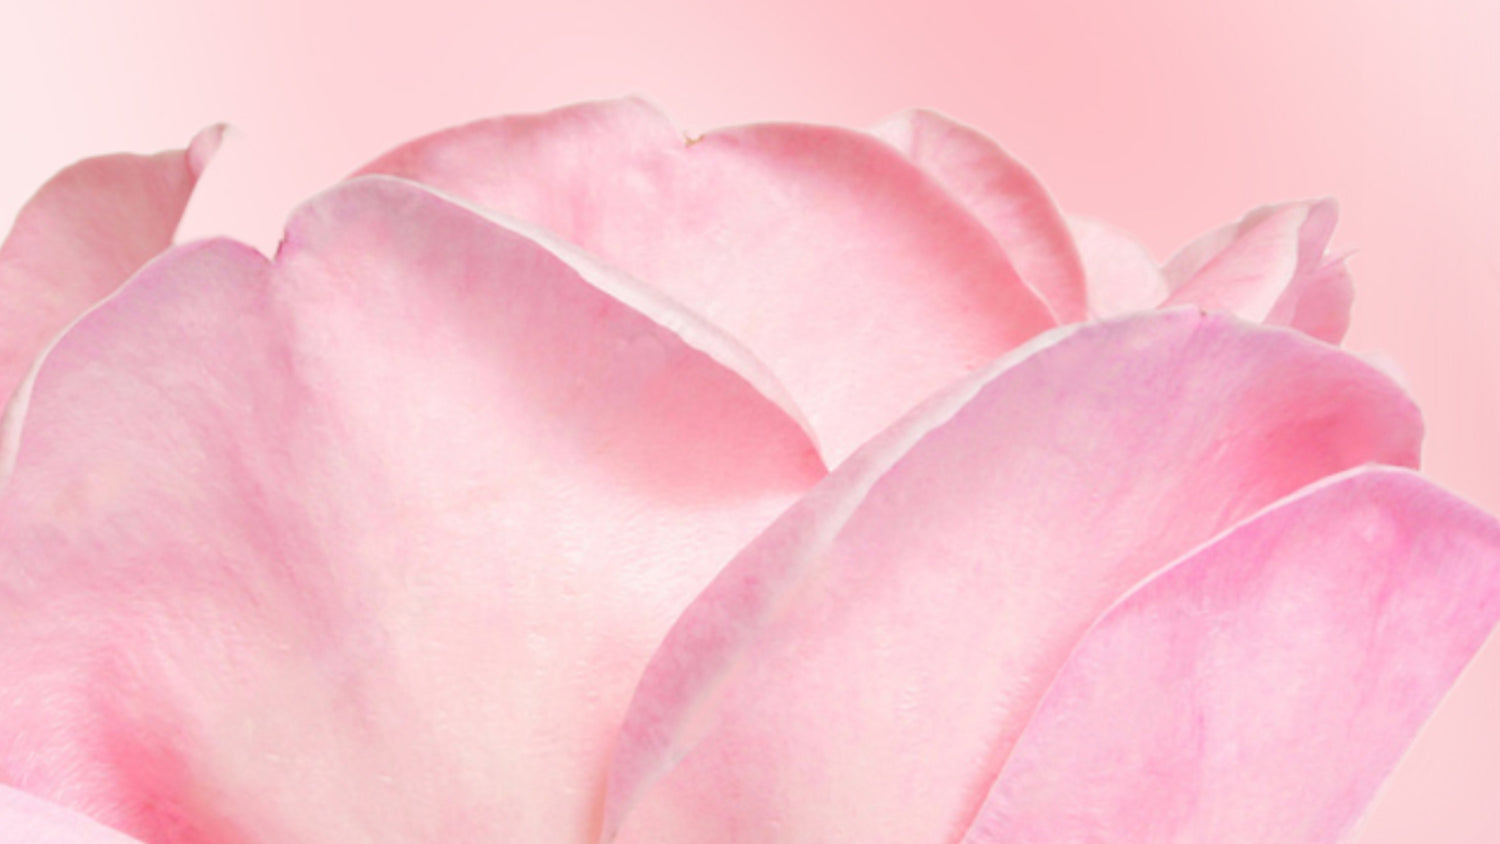 A close up of a rosa damascena flower on a pink background.